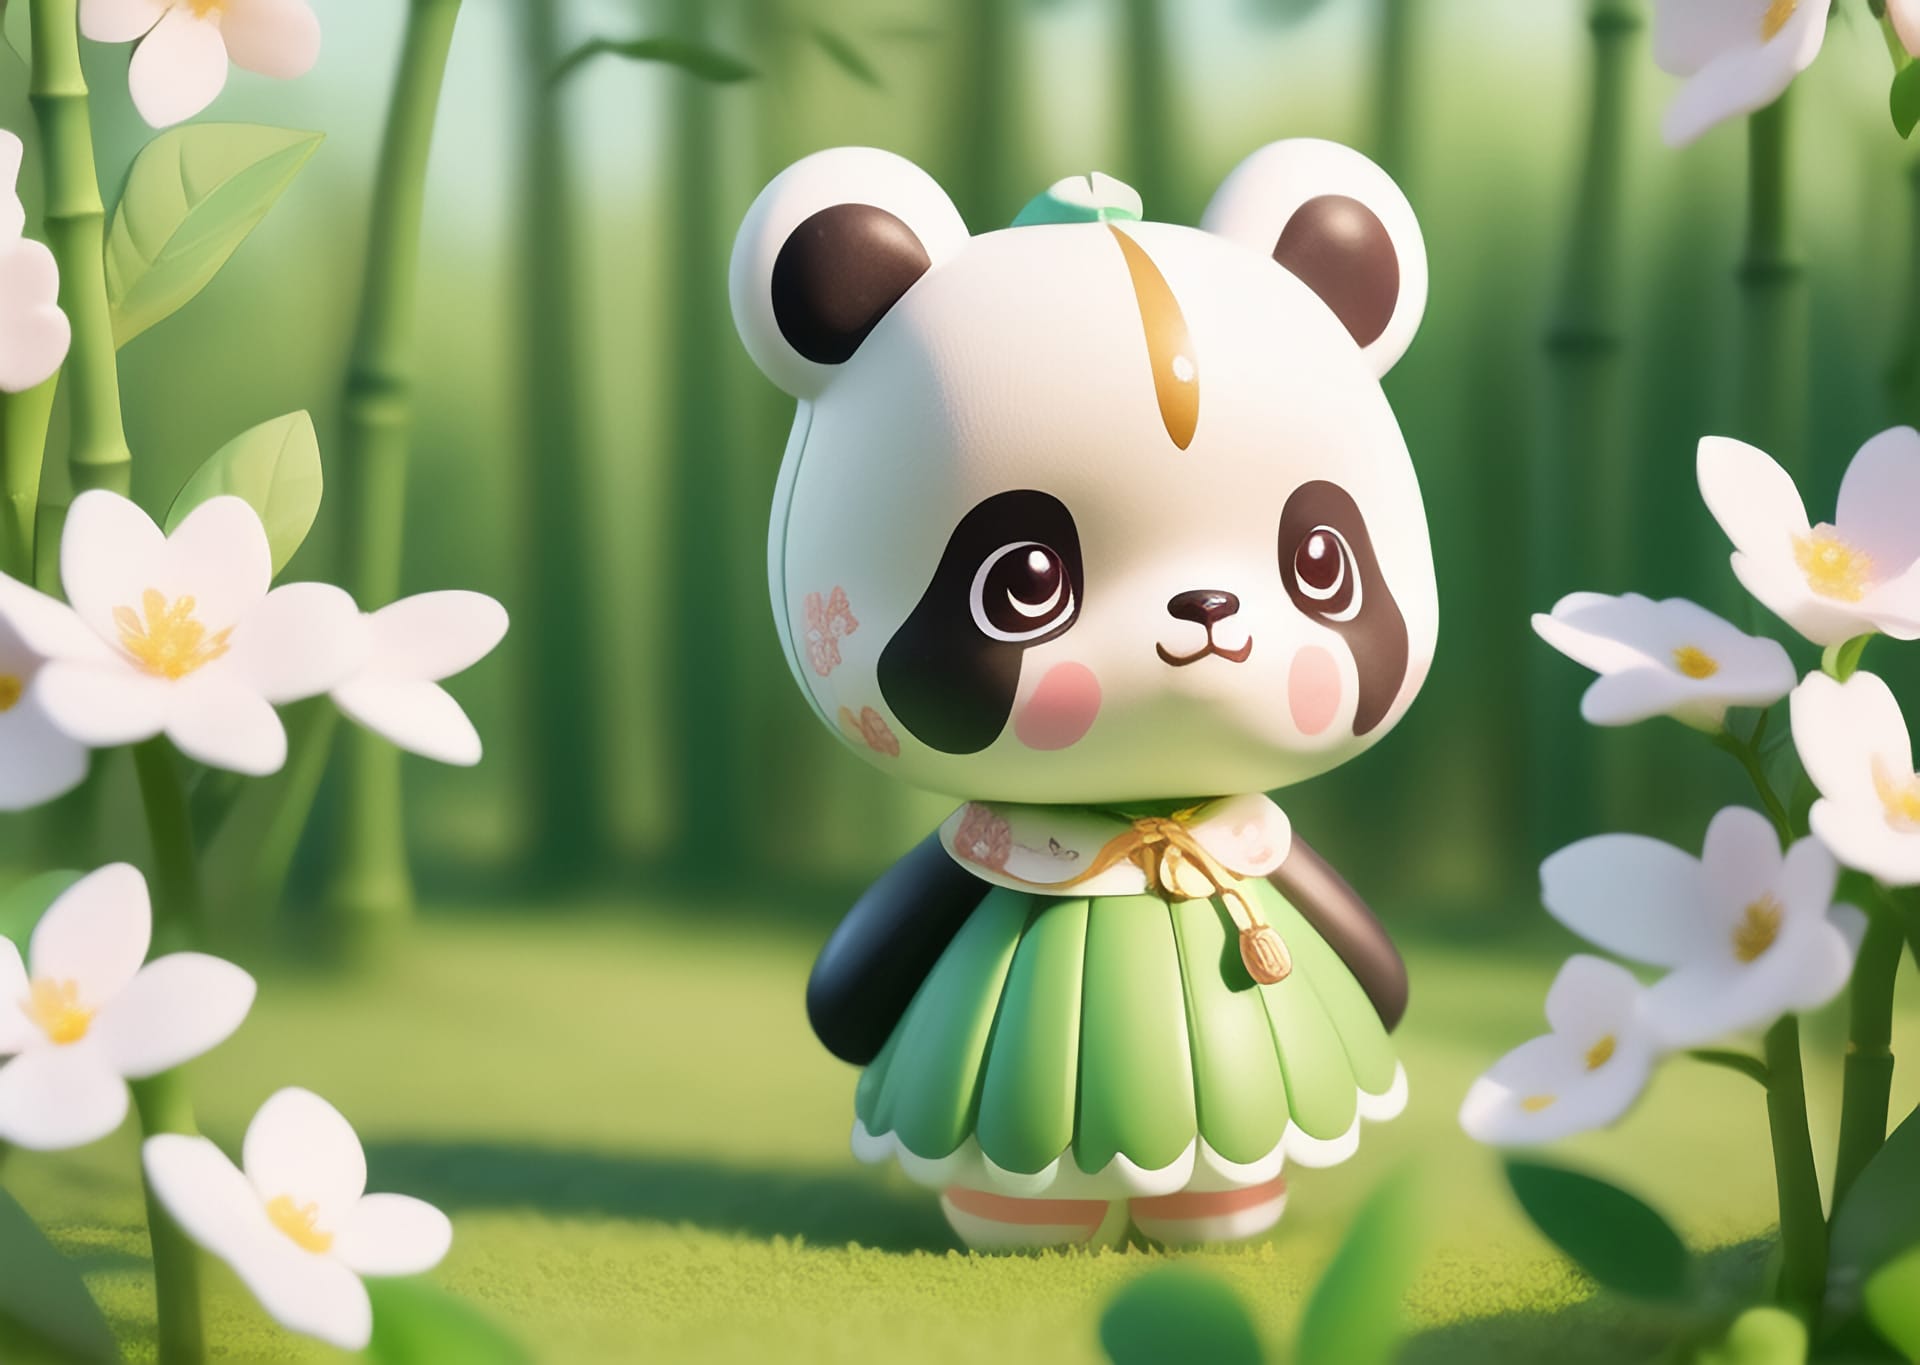 Toy panda with green dress stands forest with white flowers